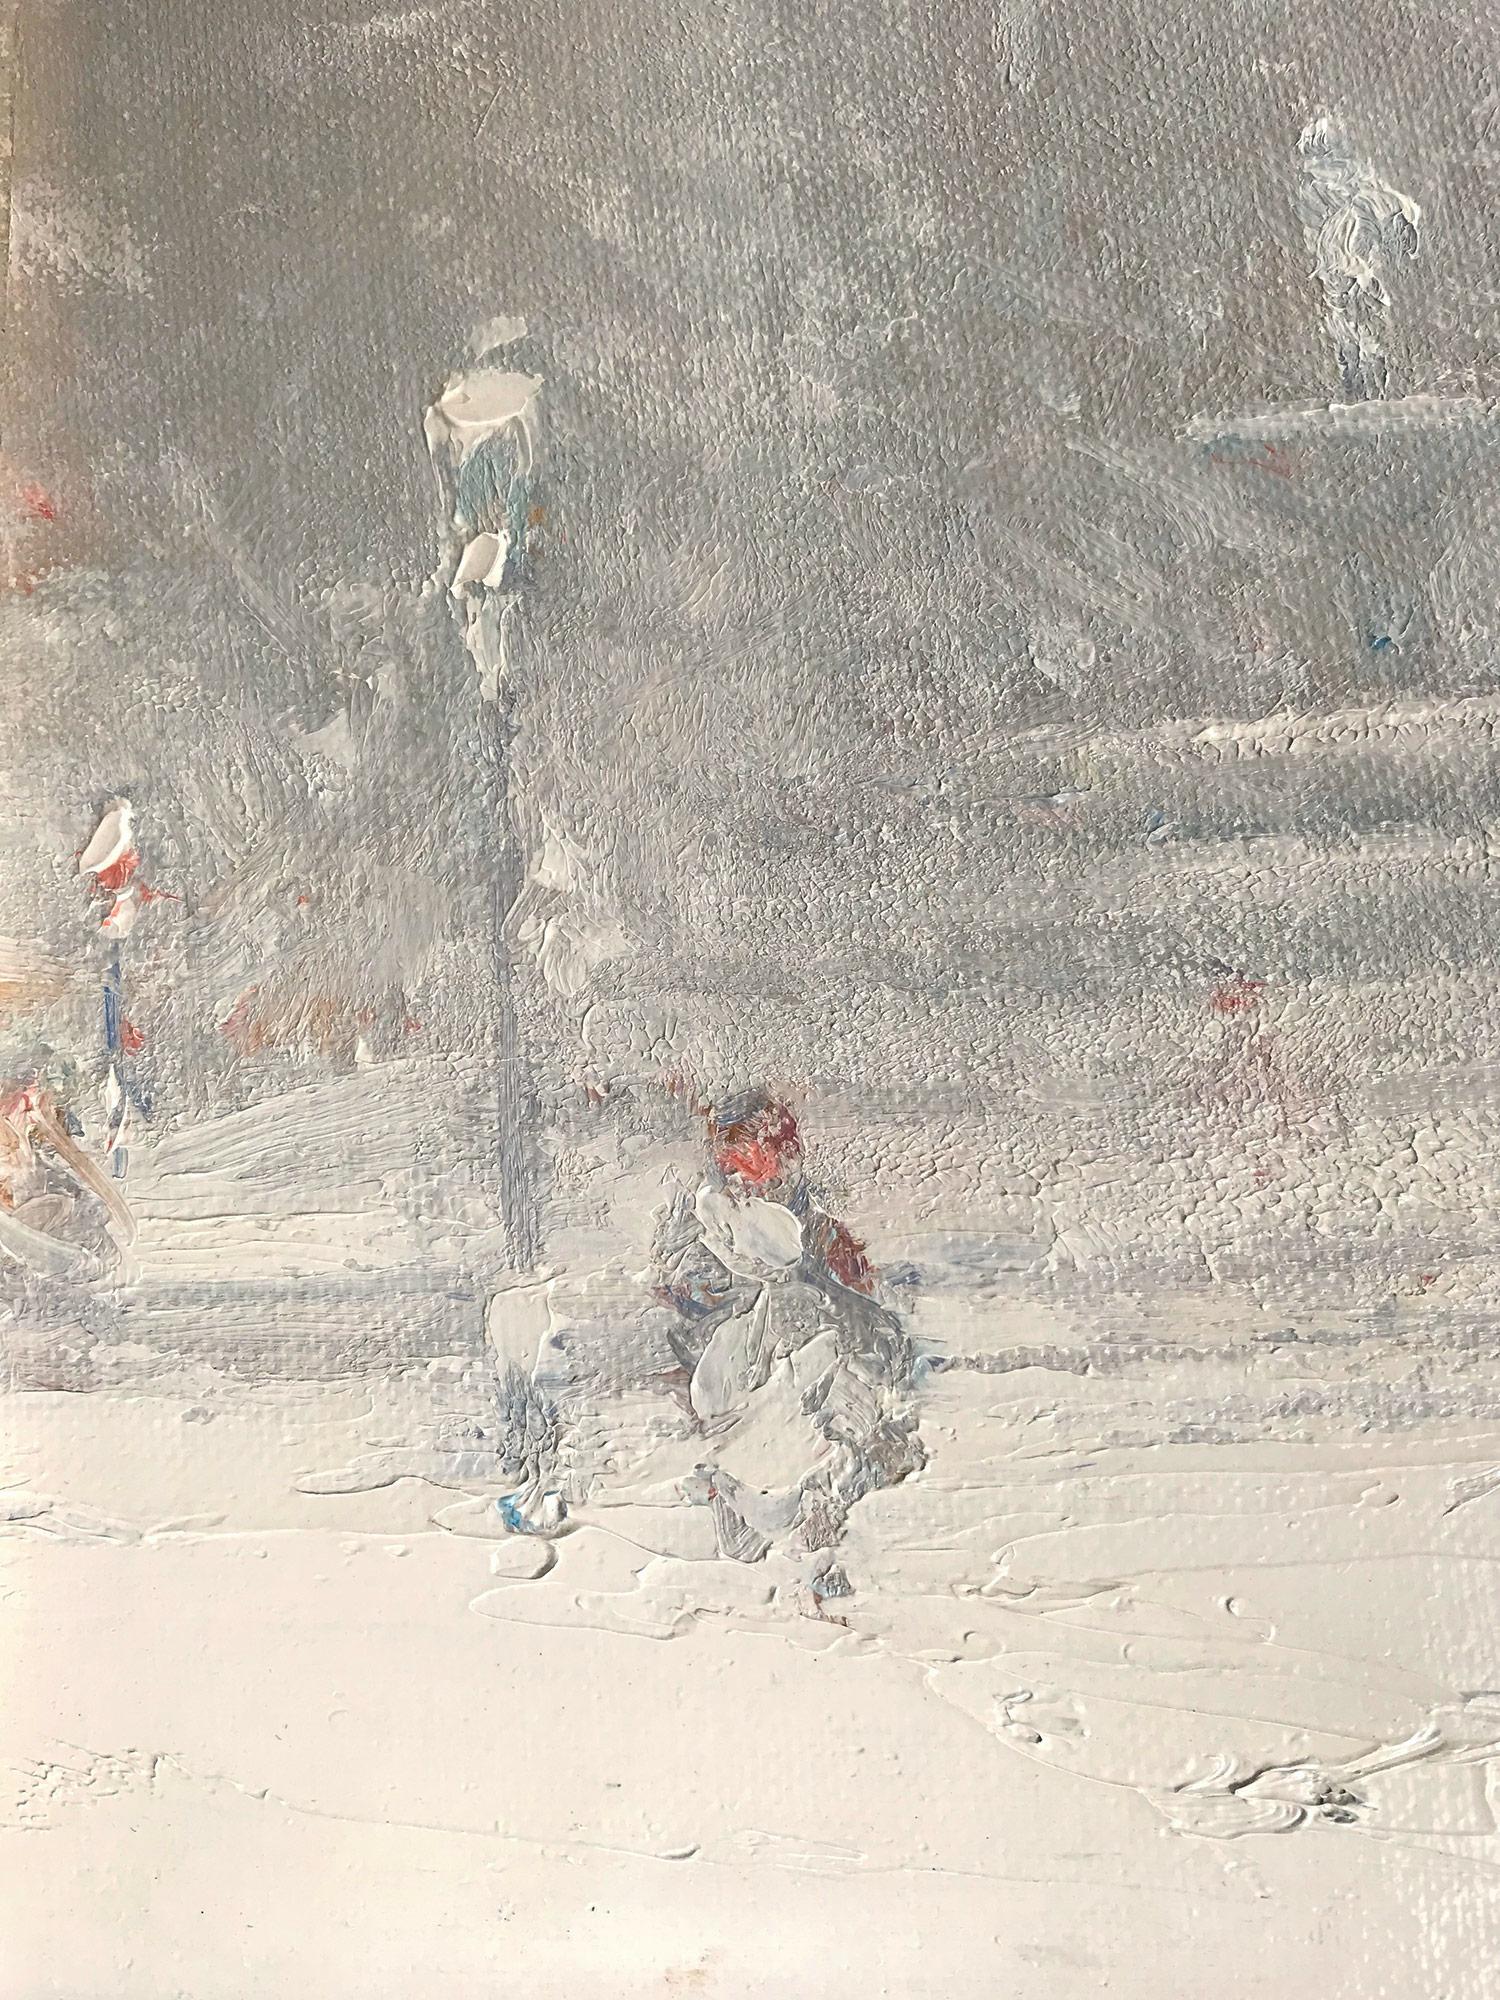 A wonderful and pertinent example of Berthelsen's charming New York City winter scenes depicting The Grand Army Plaza at the entrance to Central Park, anchored by the bronze statue of Union Gen. William T. Sherman and also the Plaza Hotel on the